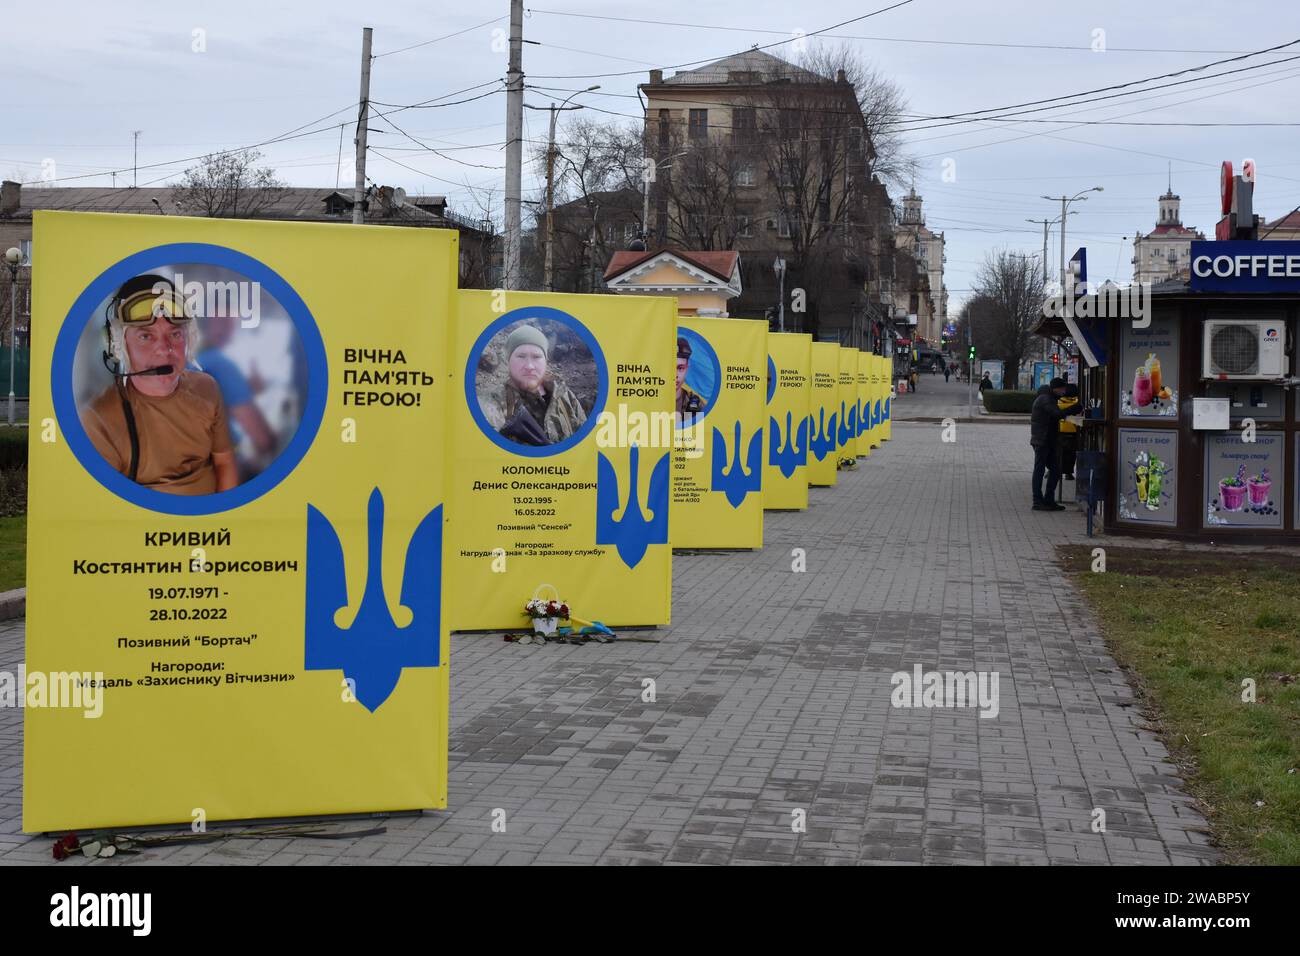 View of stands of portraits of fallen Ukrainian soldiers seen at the center of Zaporizhzhia. Ukrainian President Volodymyr Zelenskiy said Russian forces are suffering heavy losses and the notion that Moscow is winning the nearly two-year-old war is only a 'feeling' not based on reality. There was no response to a request for comment from Russian officials on Zelenskiy's remarks. Russian officials have said Western estimates of Russian death tolls are vastly exaggerated and almost always underestimate Ukrainian losses. Stock Photo